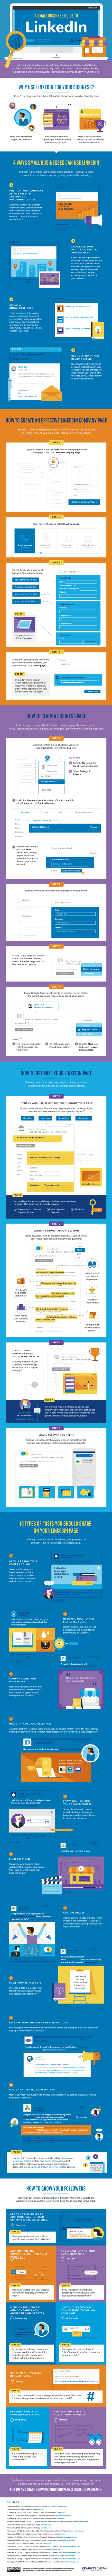 Infographic: How to Grow Your Small Business on LinkedIn